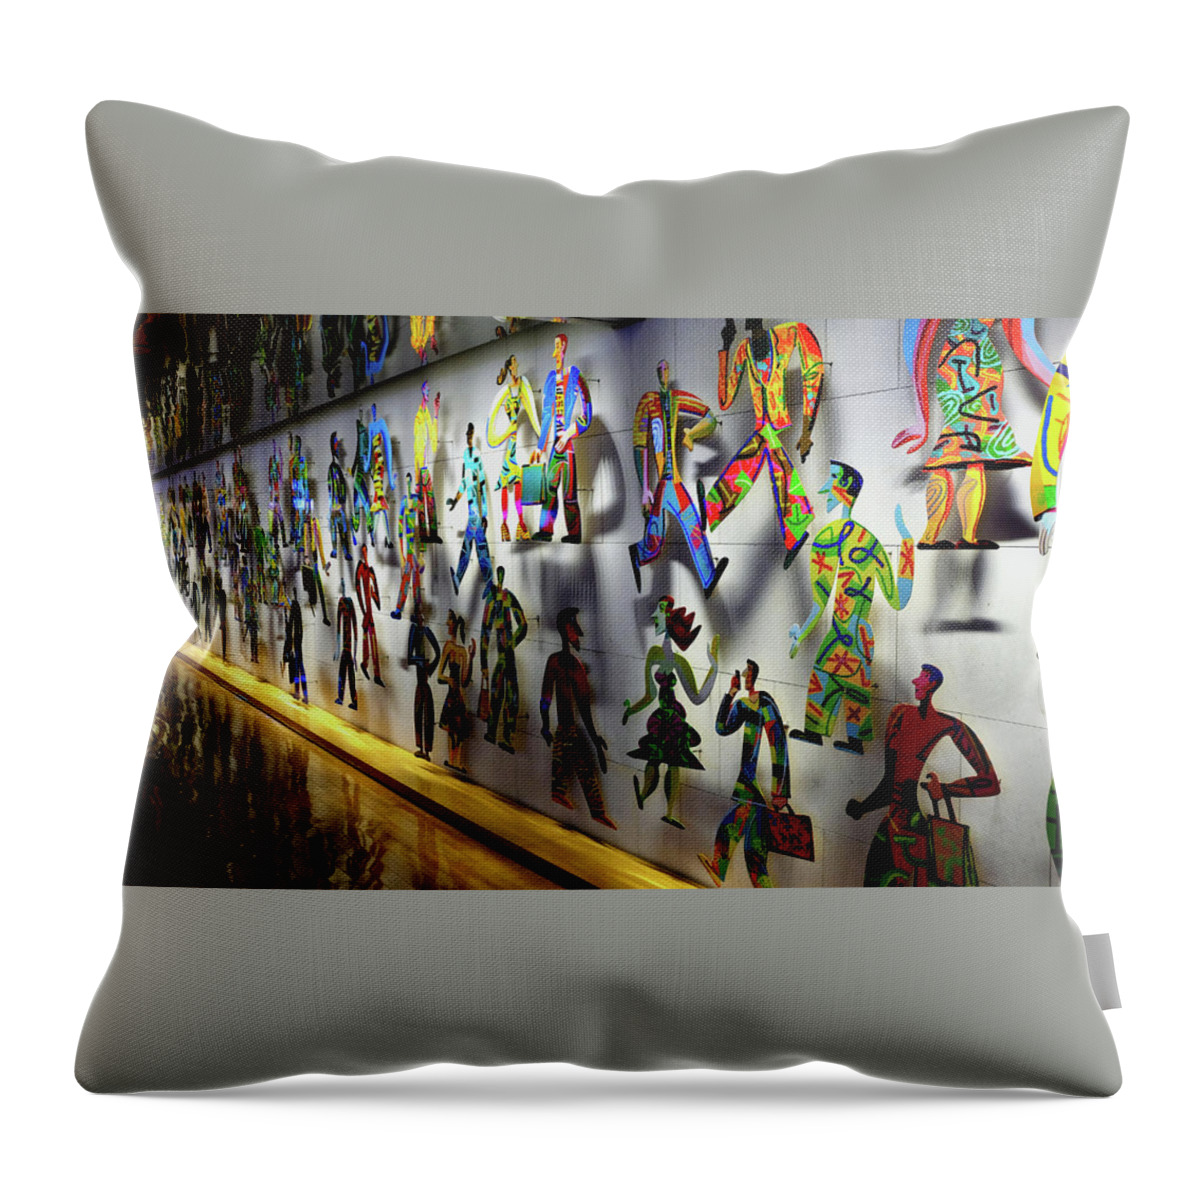 Mall Art Throw Pillow featuring the photograph Colorful people by Eric Hafner